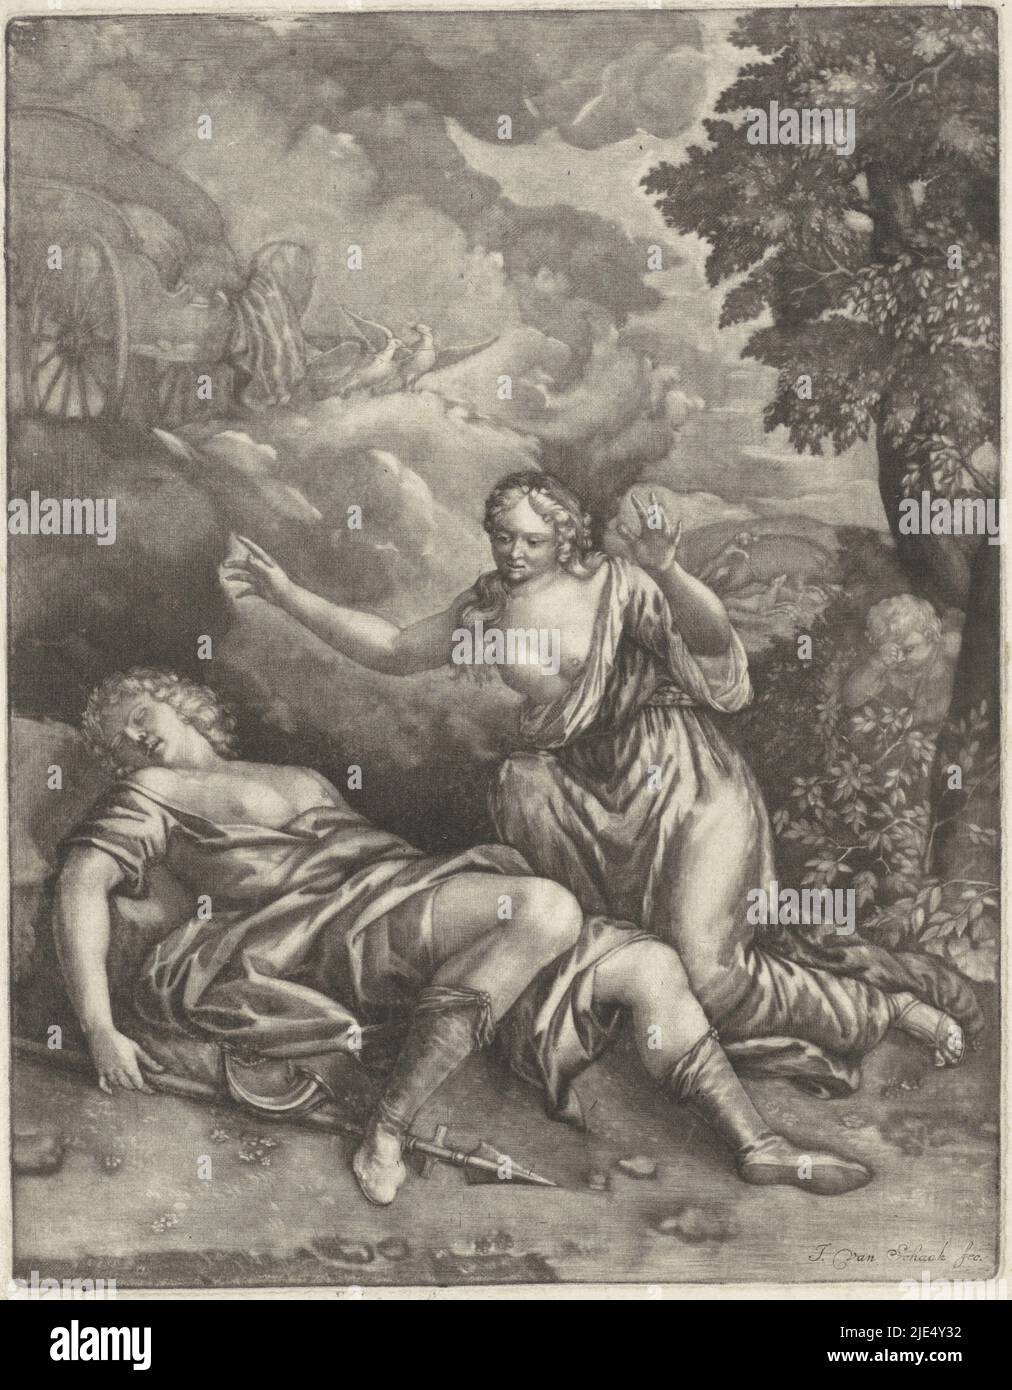 Venus kneels down at Adonis. Her empty chariot is waiting in the clouds, Venus and Adonis, print maker: Jeremias van Schaak, (mentioned on object), Northern Netherlands, 1690 - 1727, paper, h 234 mm × w 183 mm Stock Photo